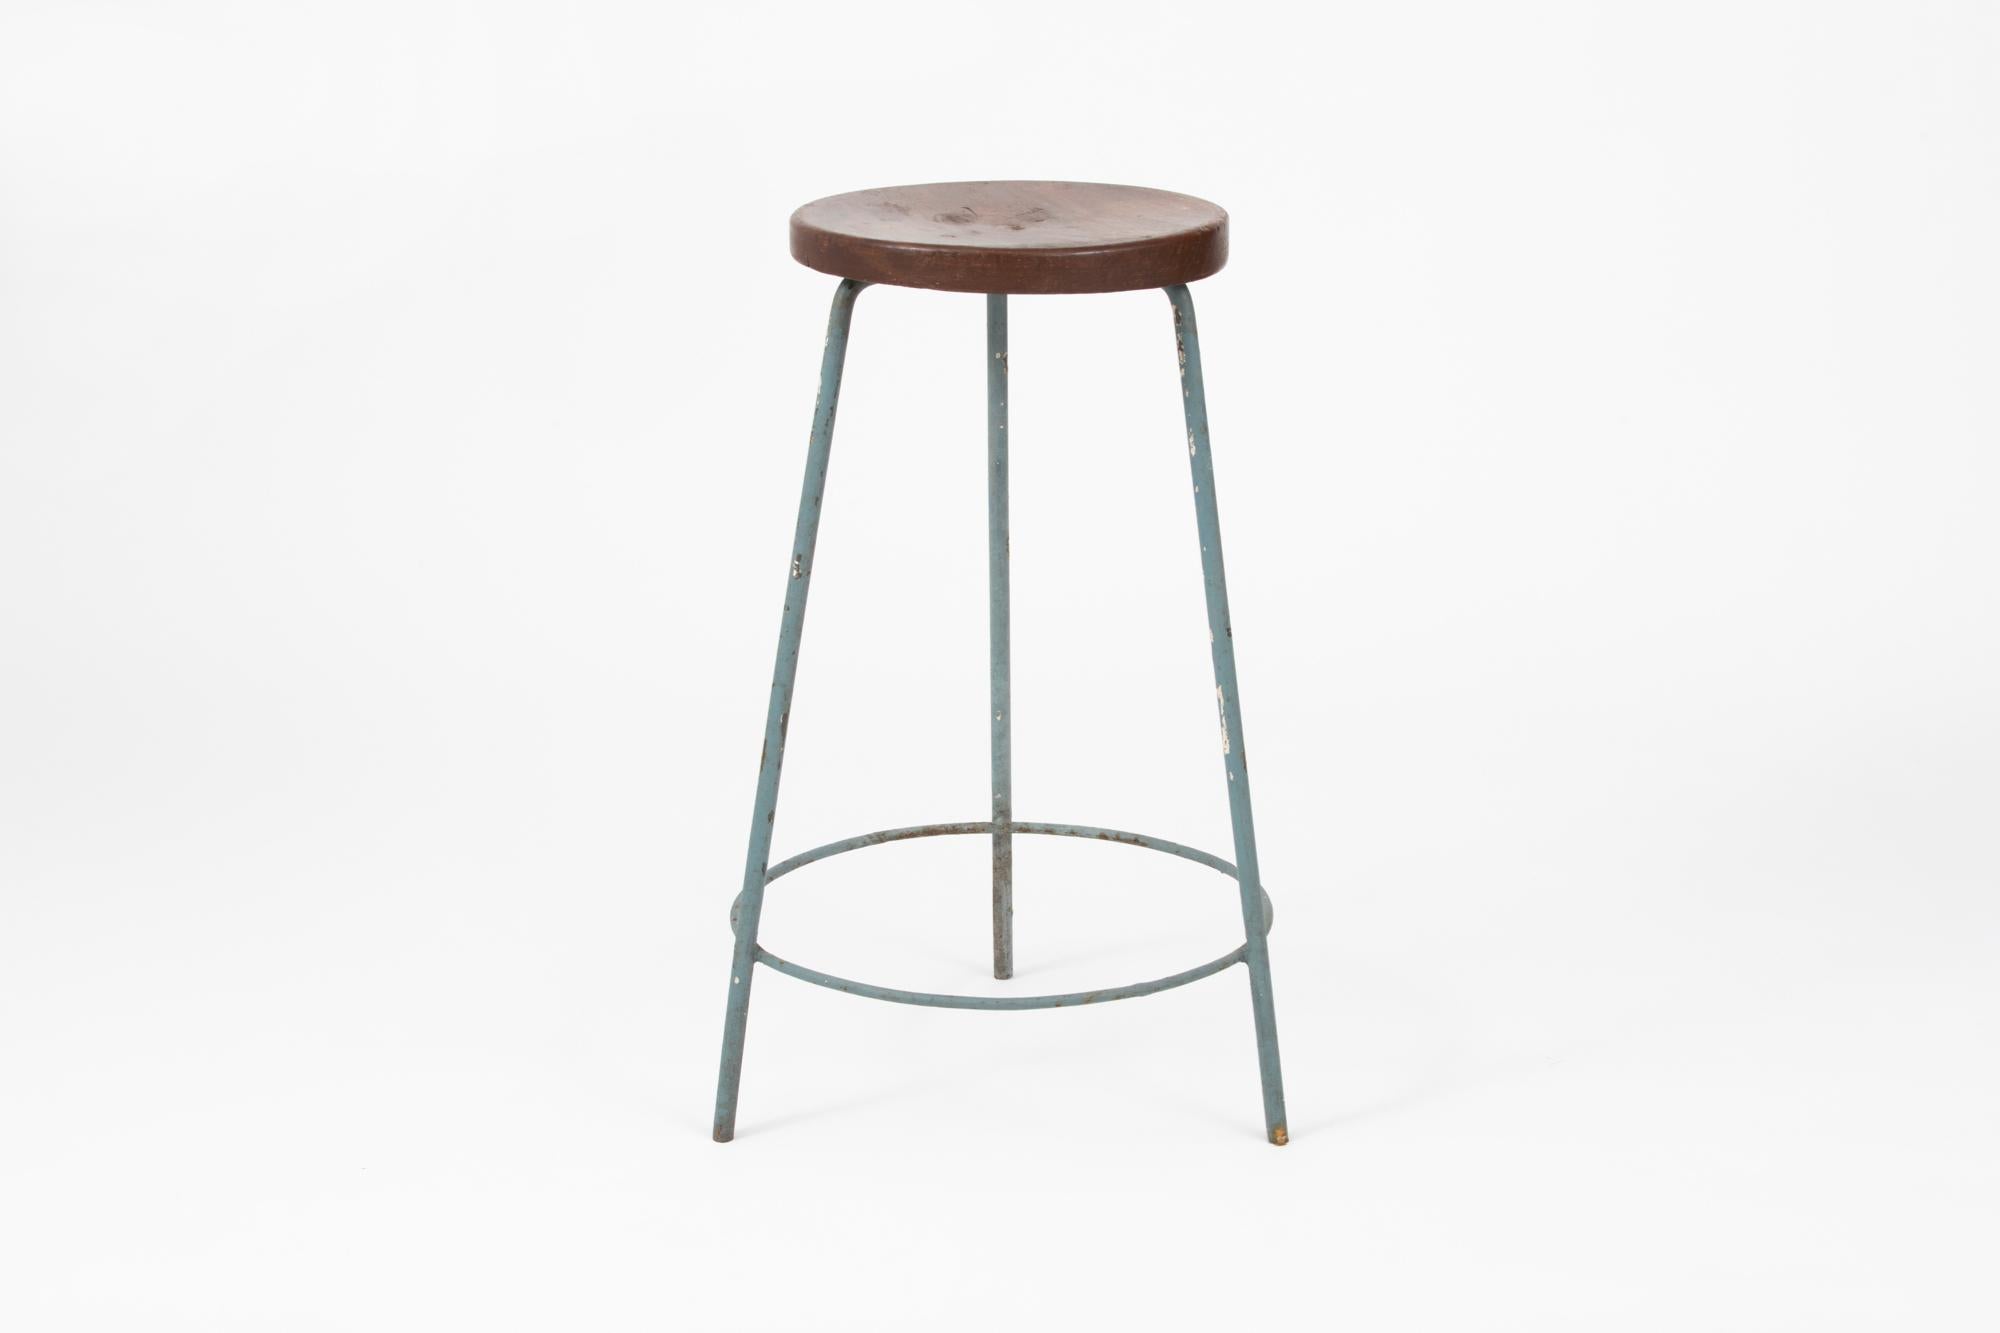 3 Original painted iron and teak stools designed by Pierre Jeanneret. These stools were created for the famous modernist capital city of Chandigarh, India that was designed by Le Corbusier, Jeanneret, and their team. Model number PJ-SI-57-A. The